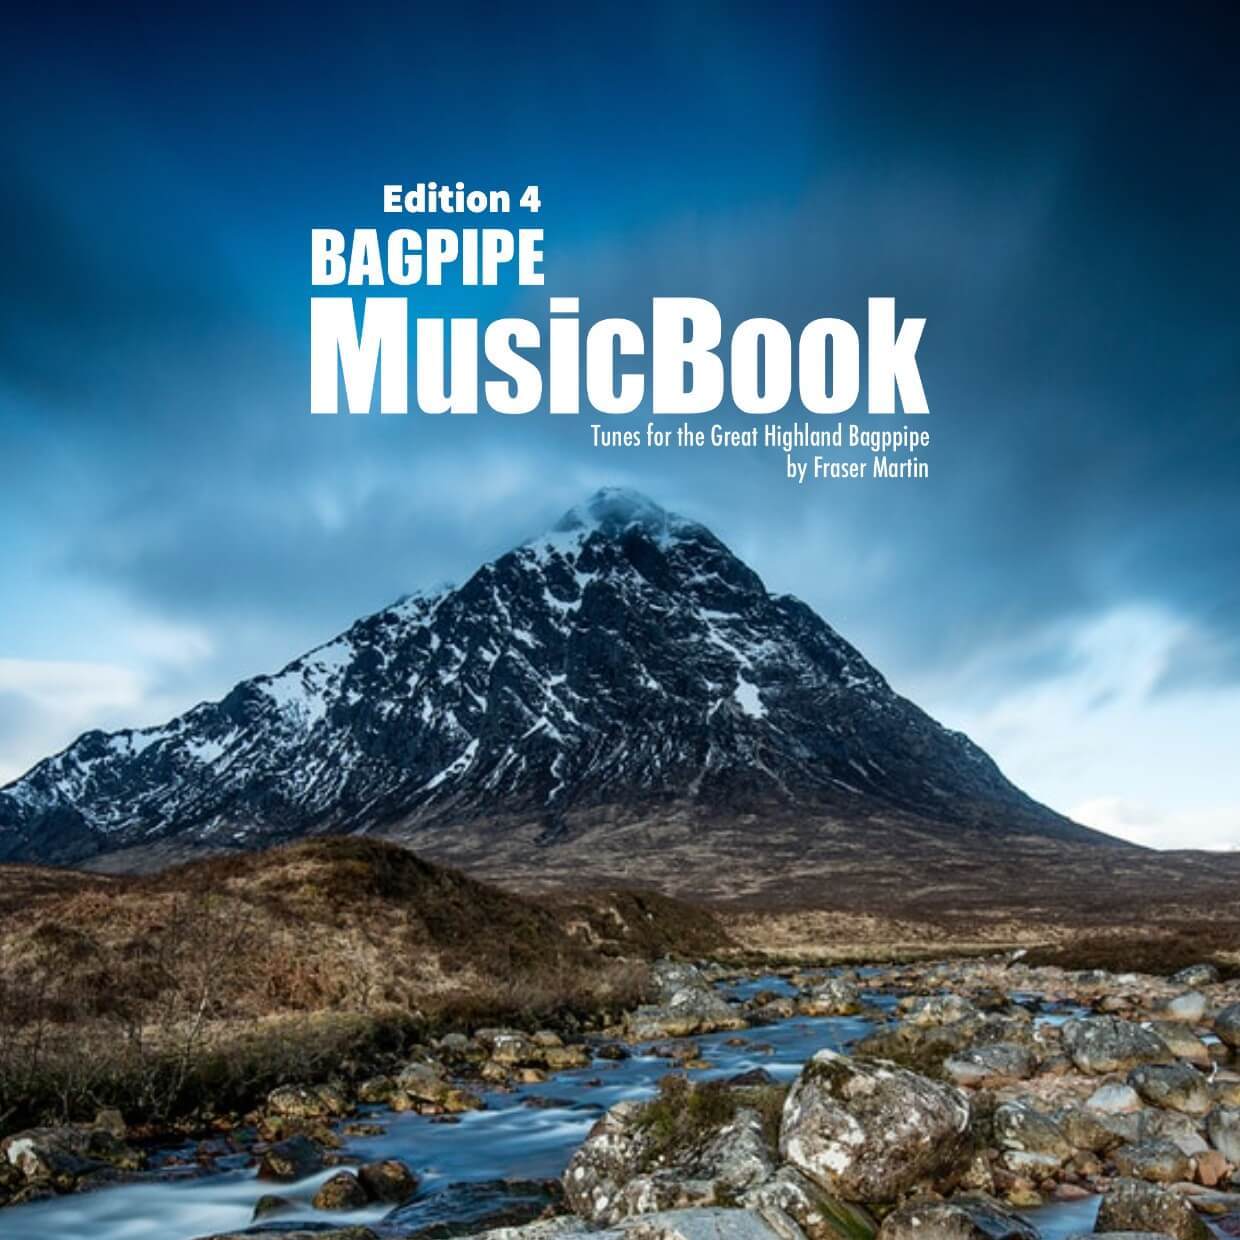 Edition 4 of the Bagpipe Music Book